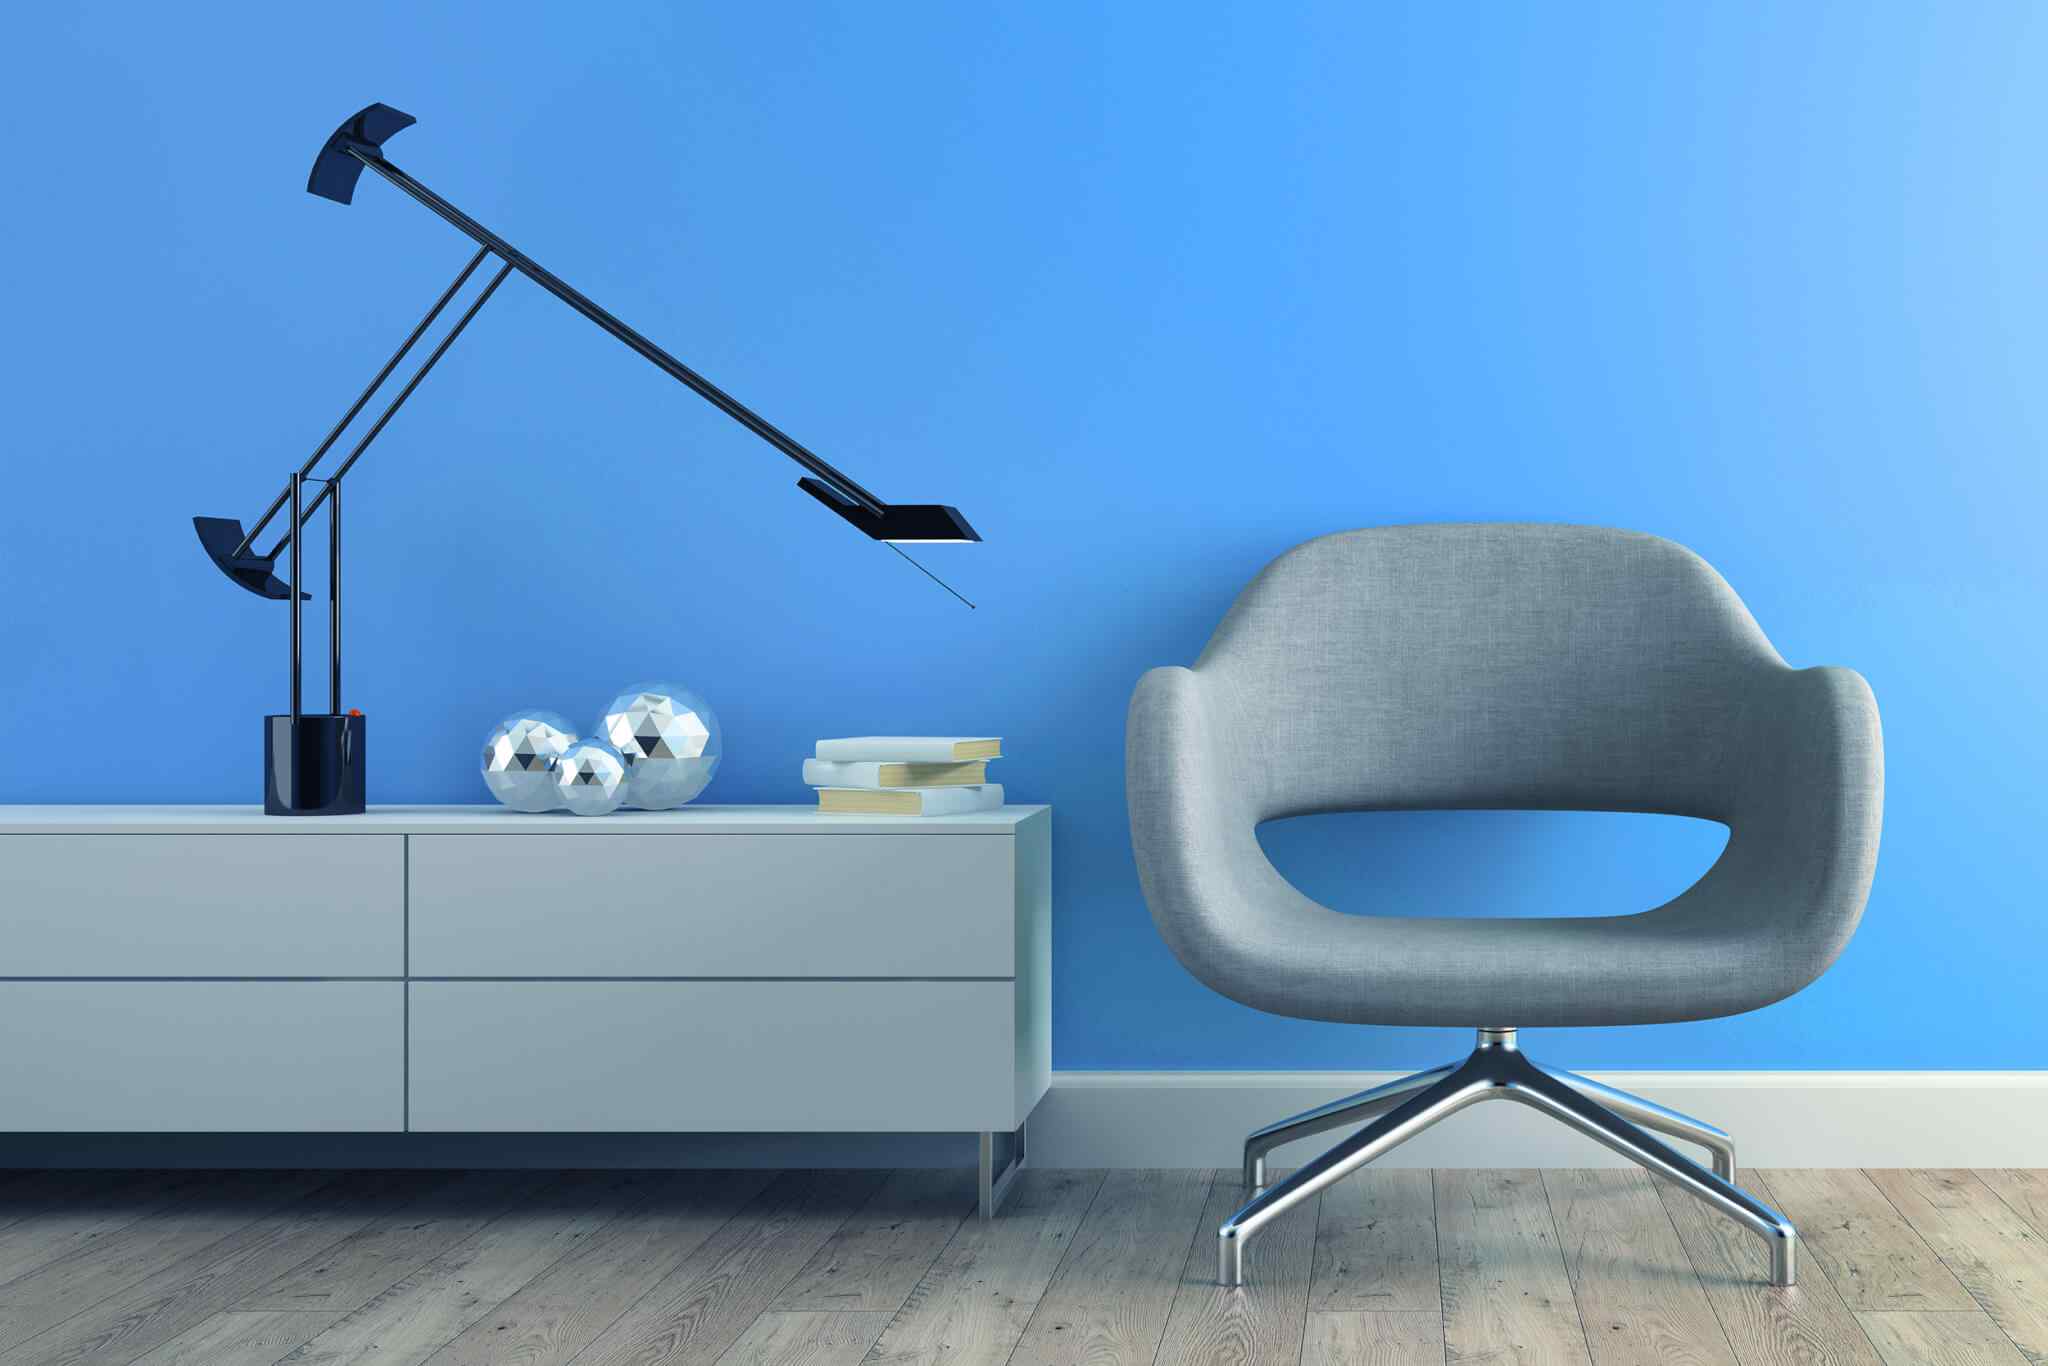 http://namestajvukovic.co.rs/wp-content/uploads/2017/05/image-chair-blue-wall.jpg